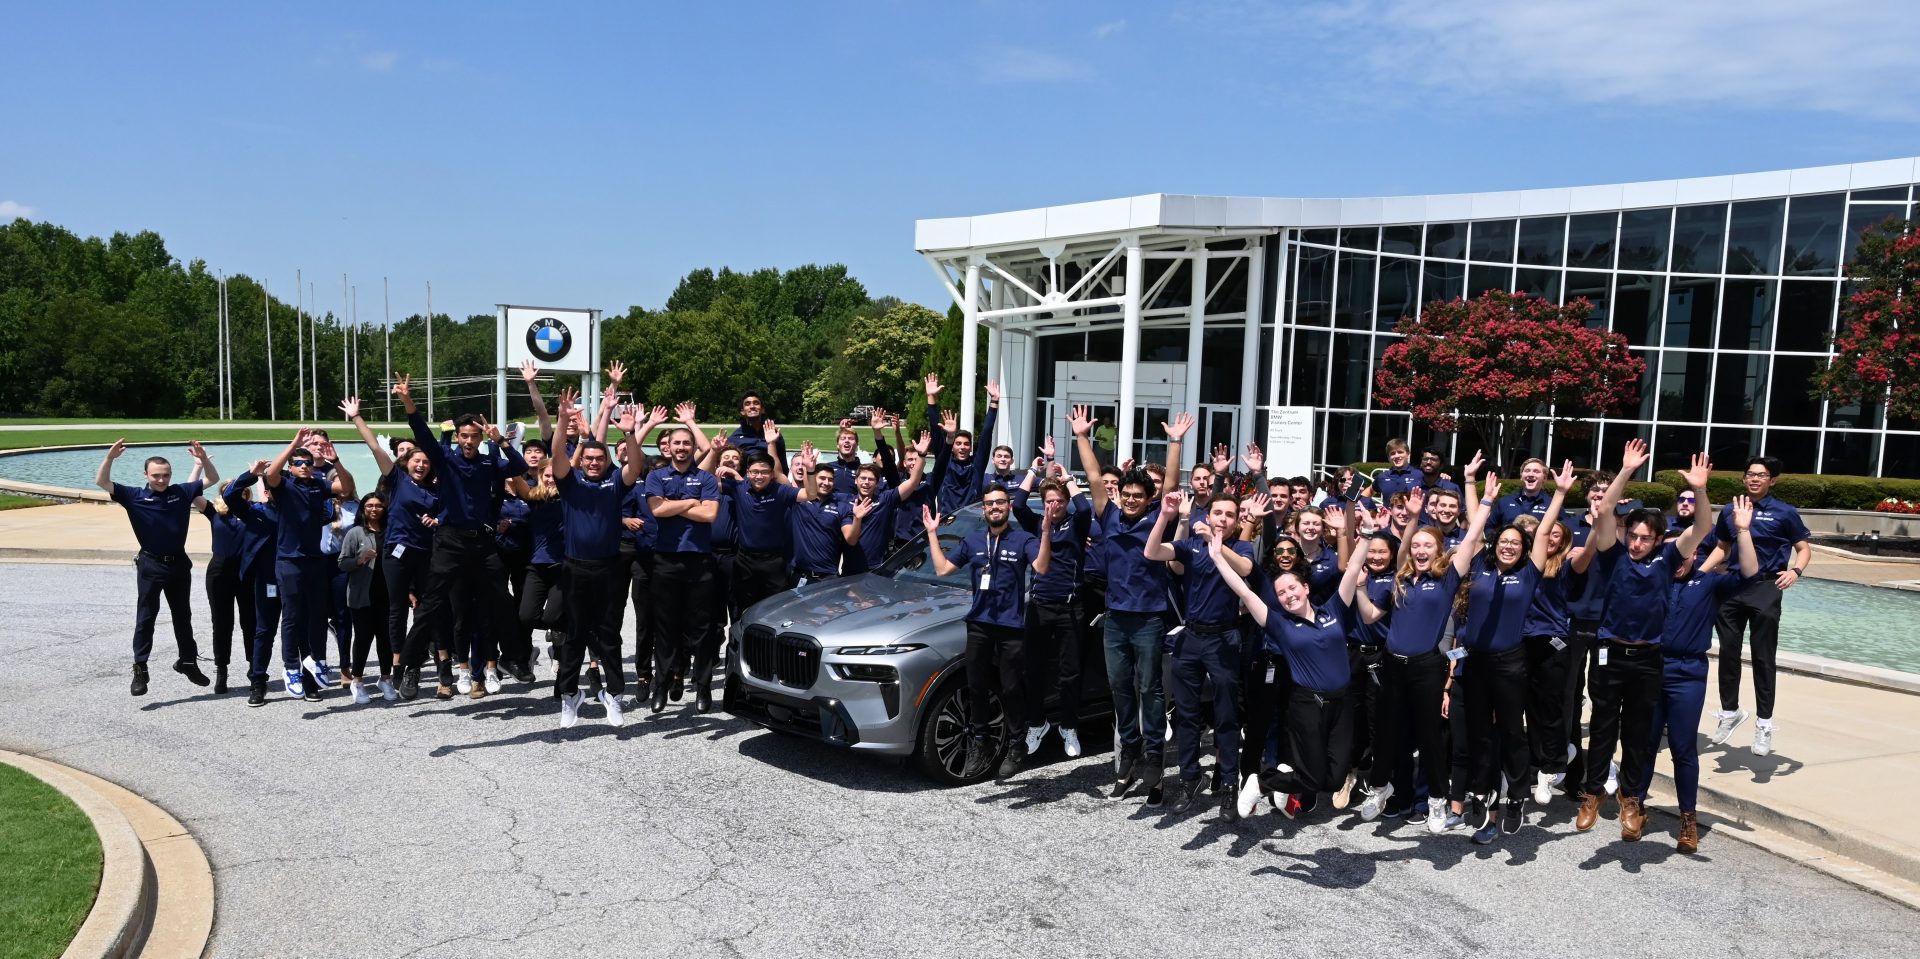 The image shows a group of international interns at the BMW plant in Spartanburg.